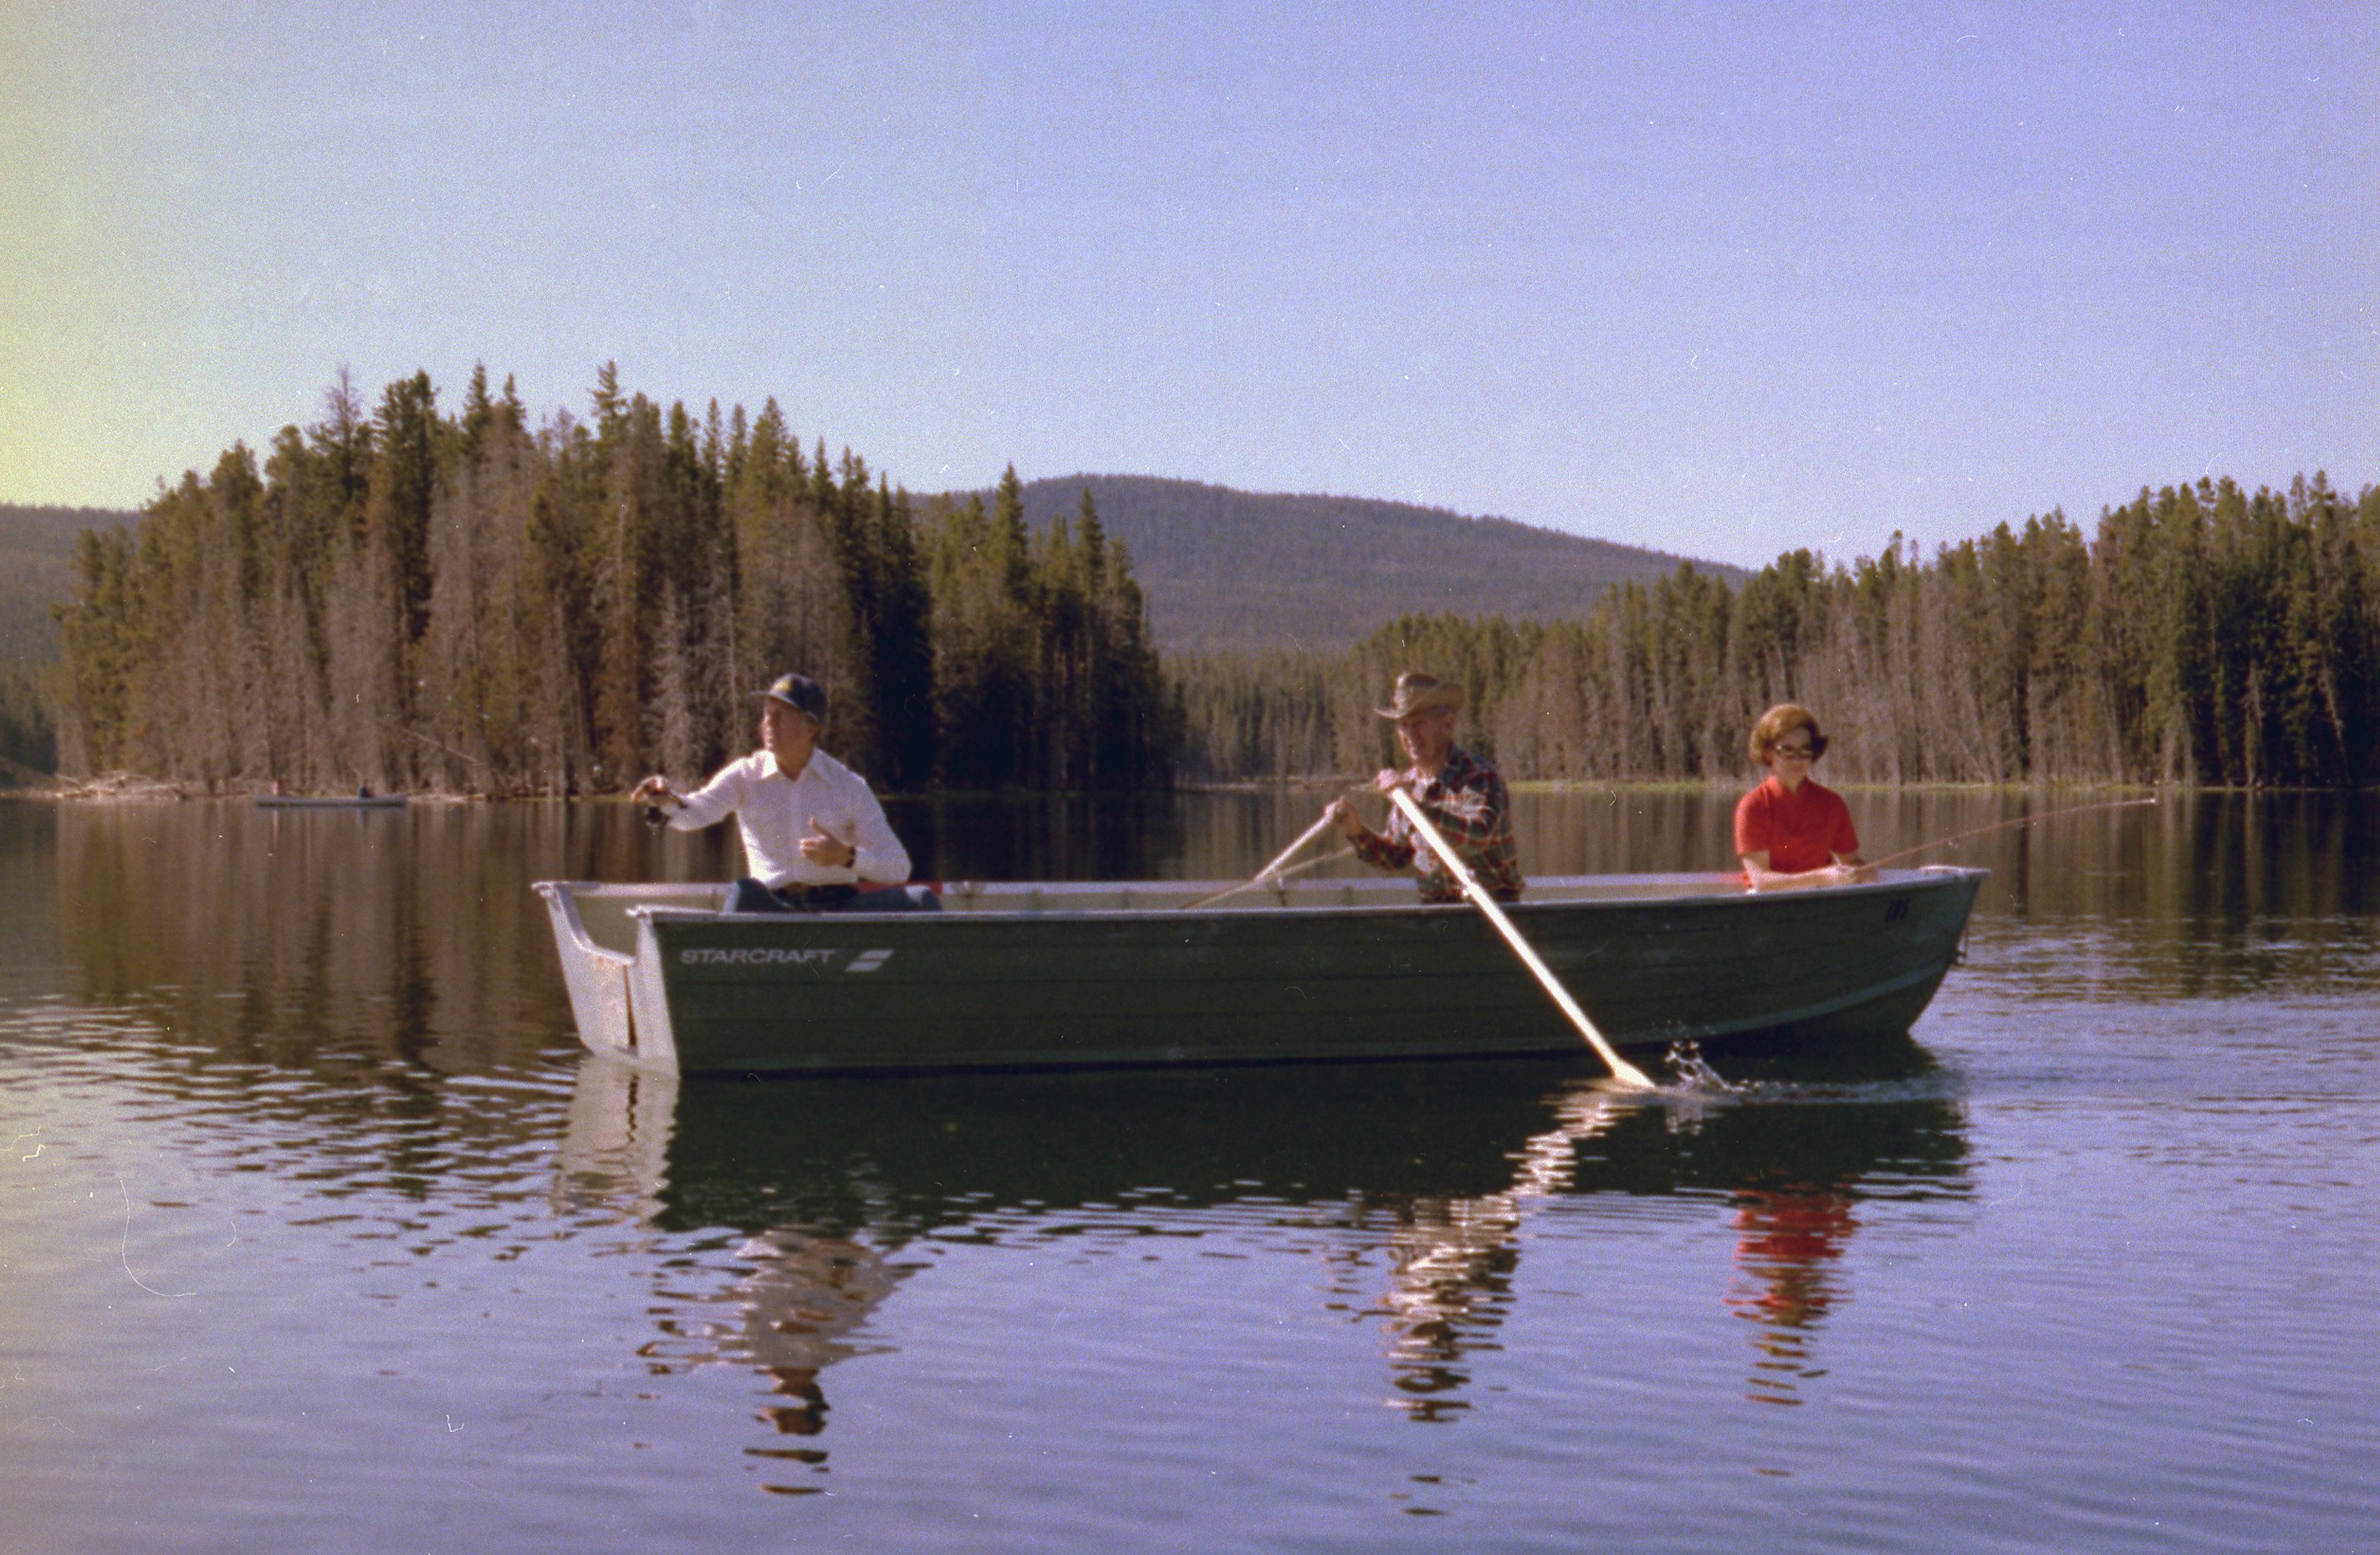 Jimmy Carter and Rosalynn Carter fishing on 26 August 1978 ┃Source: Getty Images